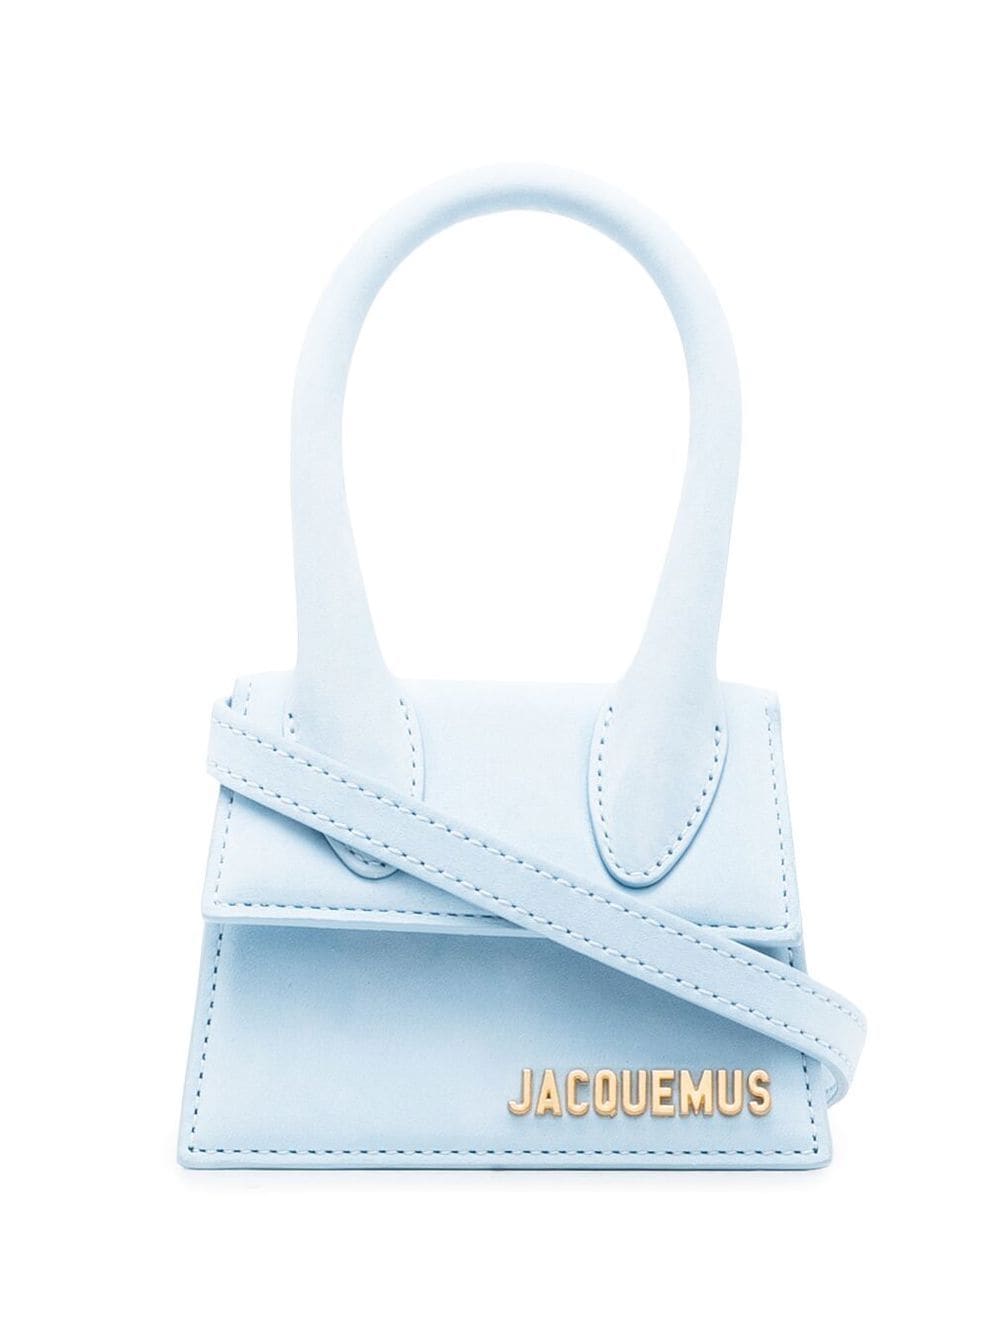 OK Jacquemus, your tiny bags are getting kind of ridiculous now Womenswear  | Dazed